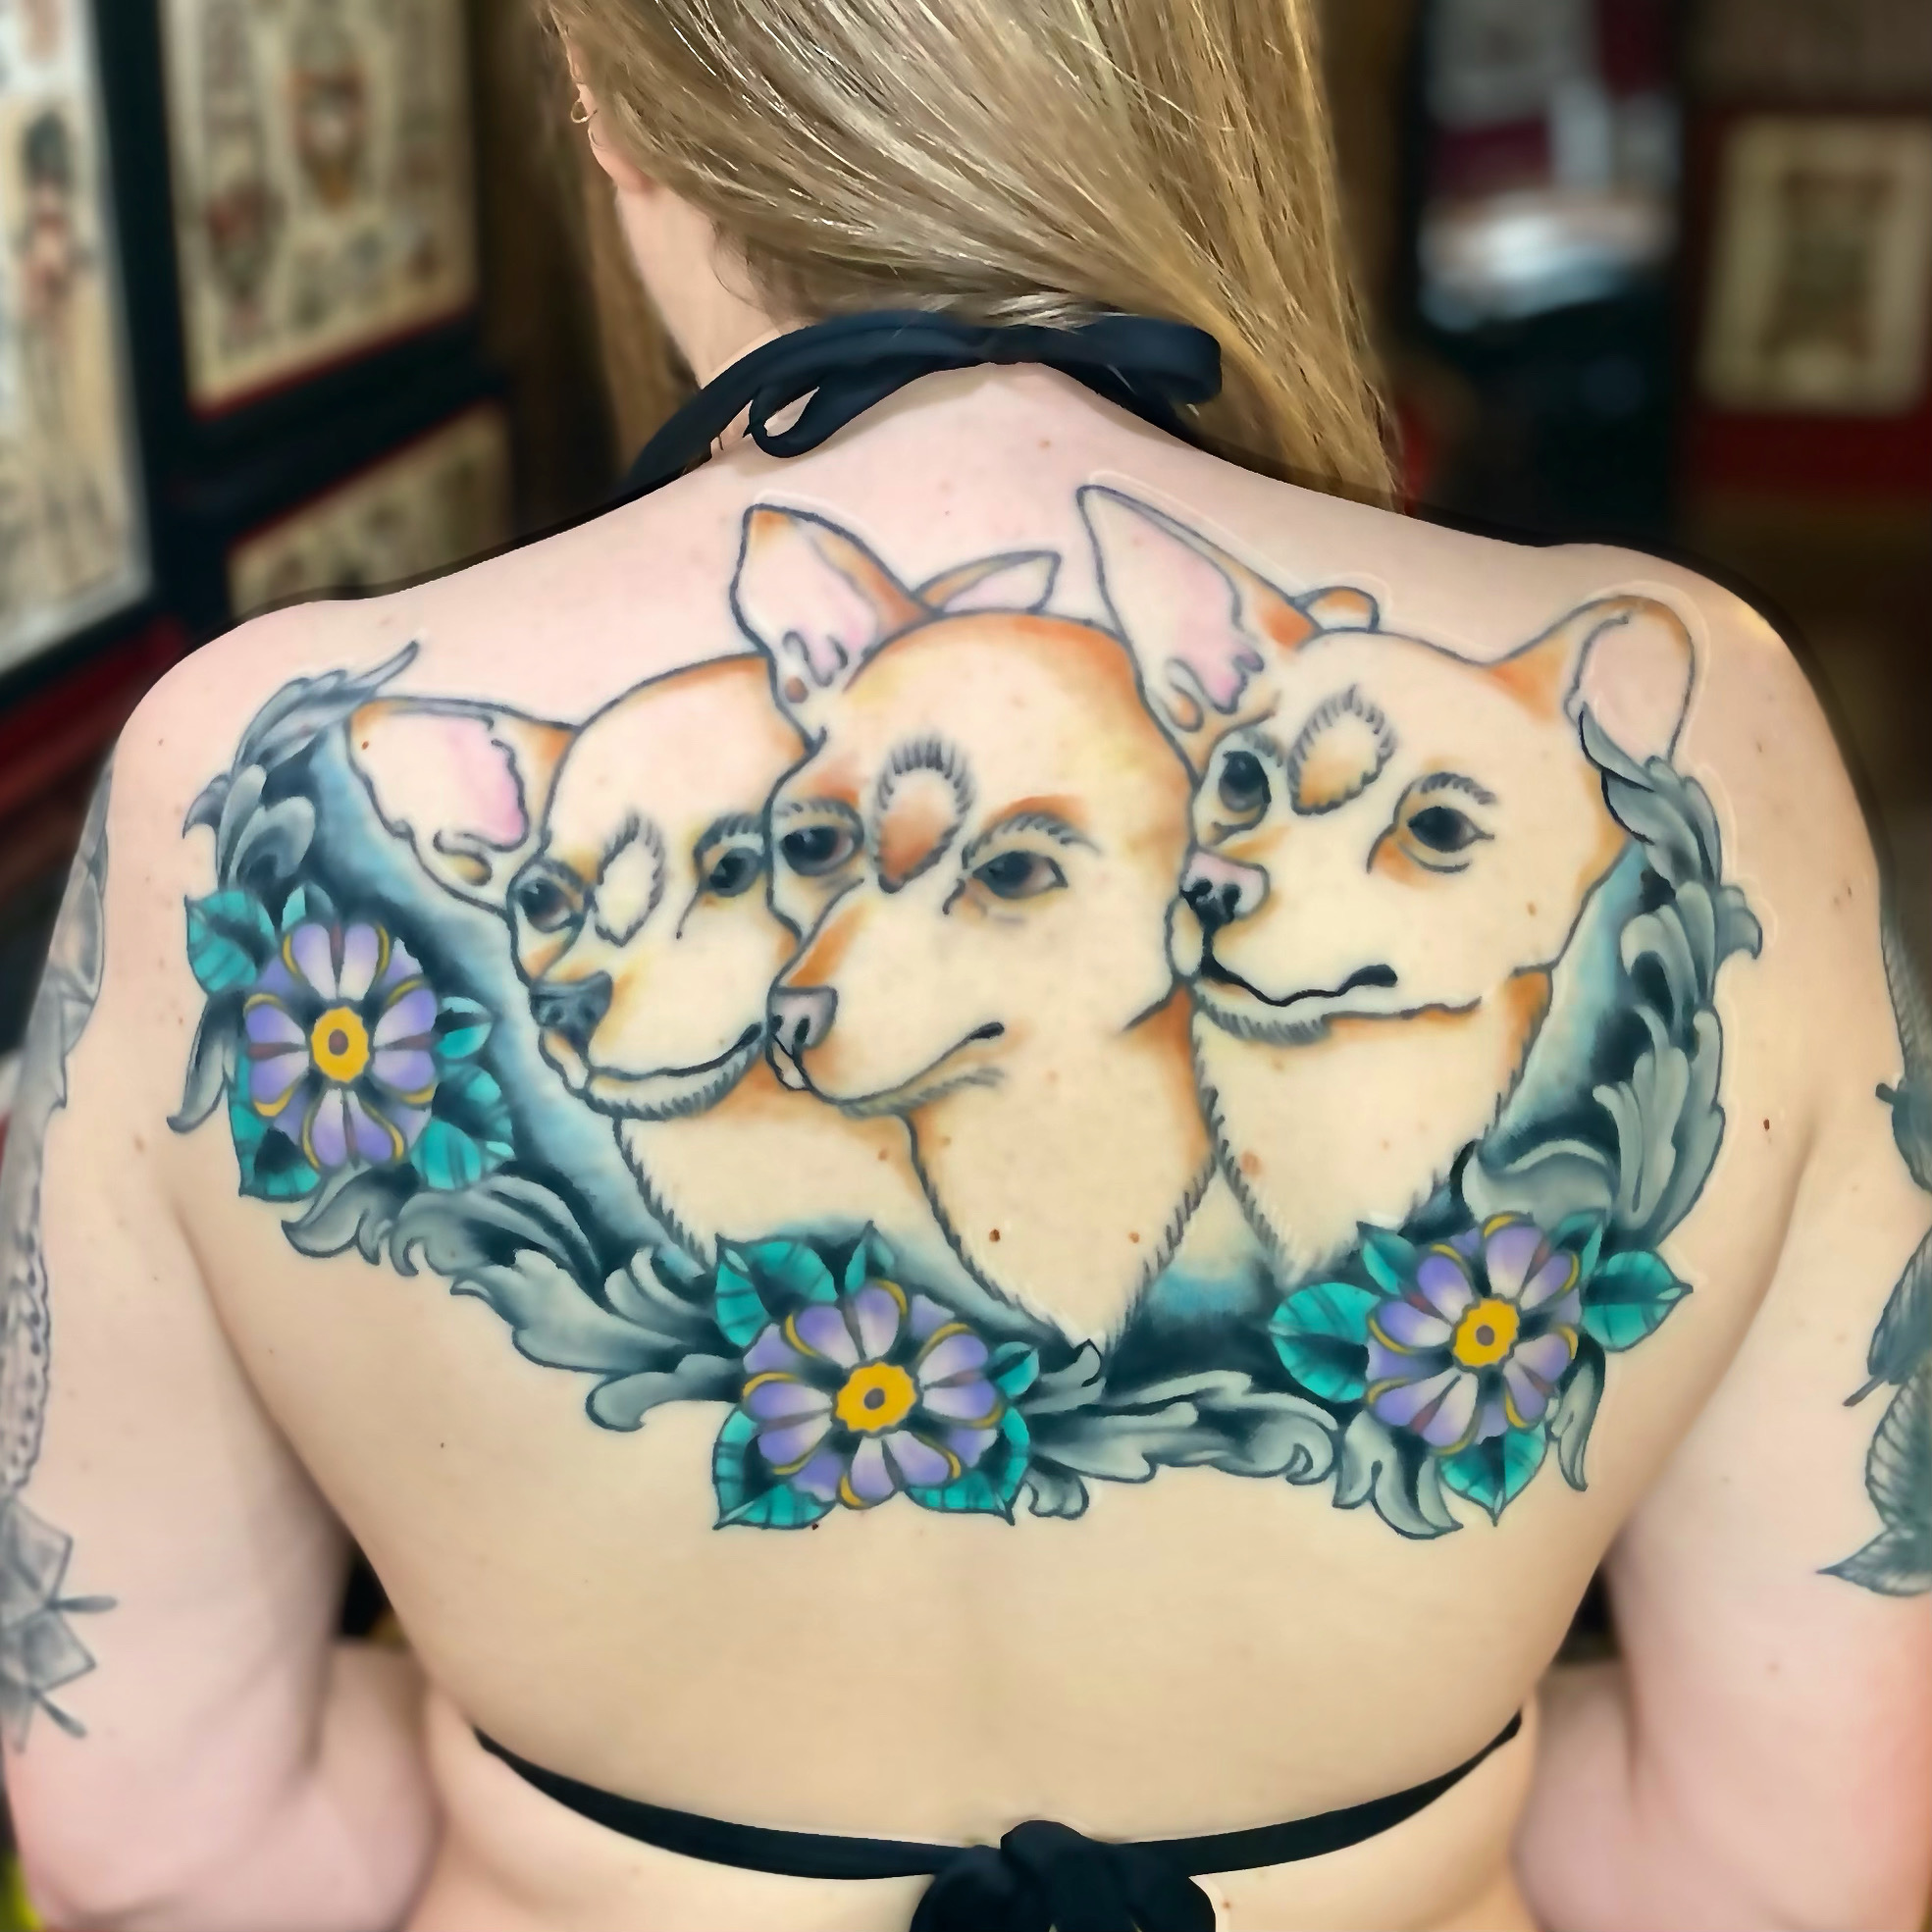 Back tattoo of dogs from top tattoo artists in dallas